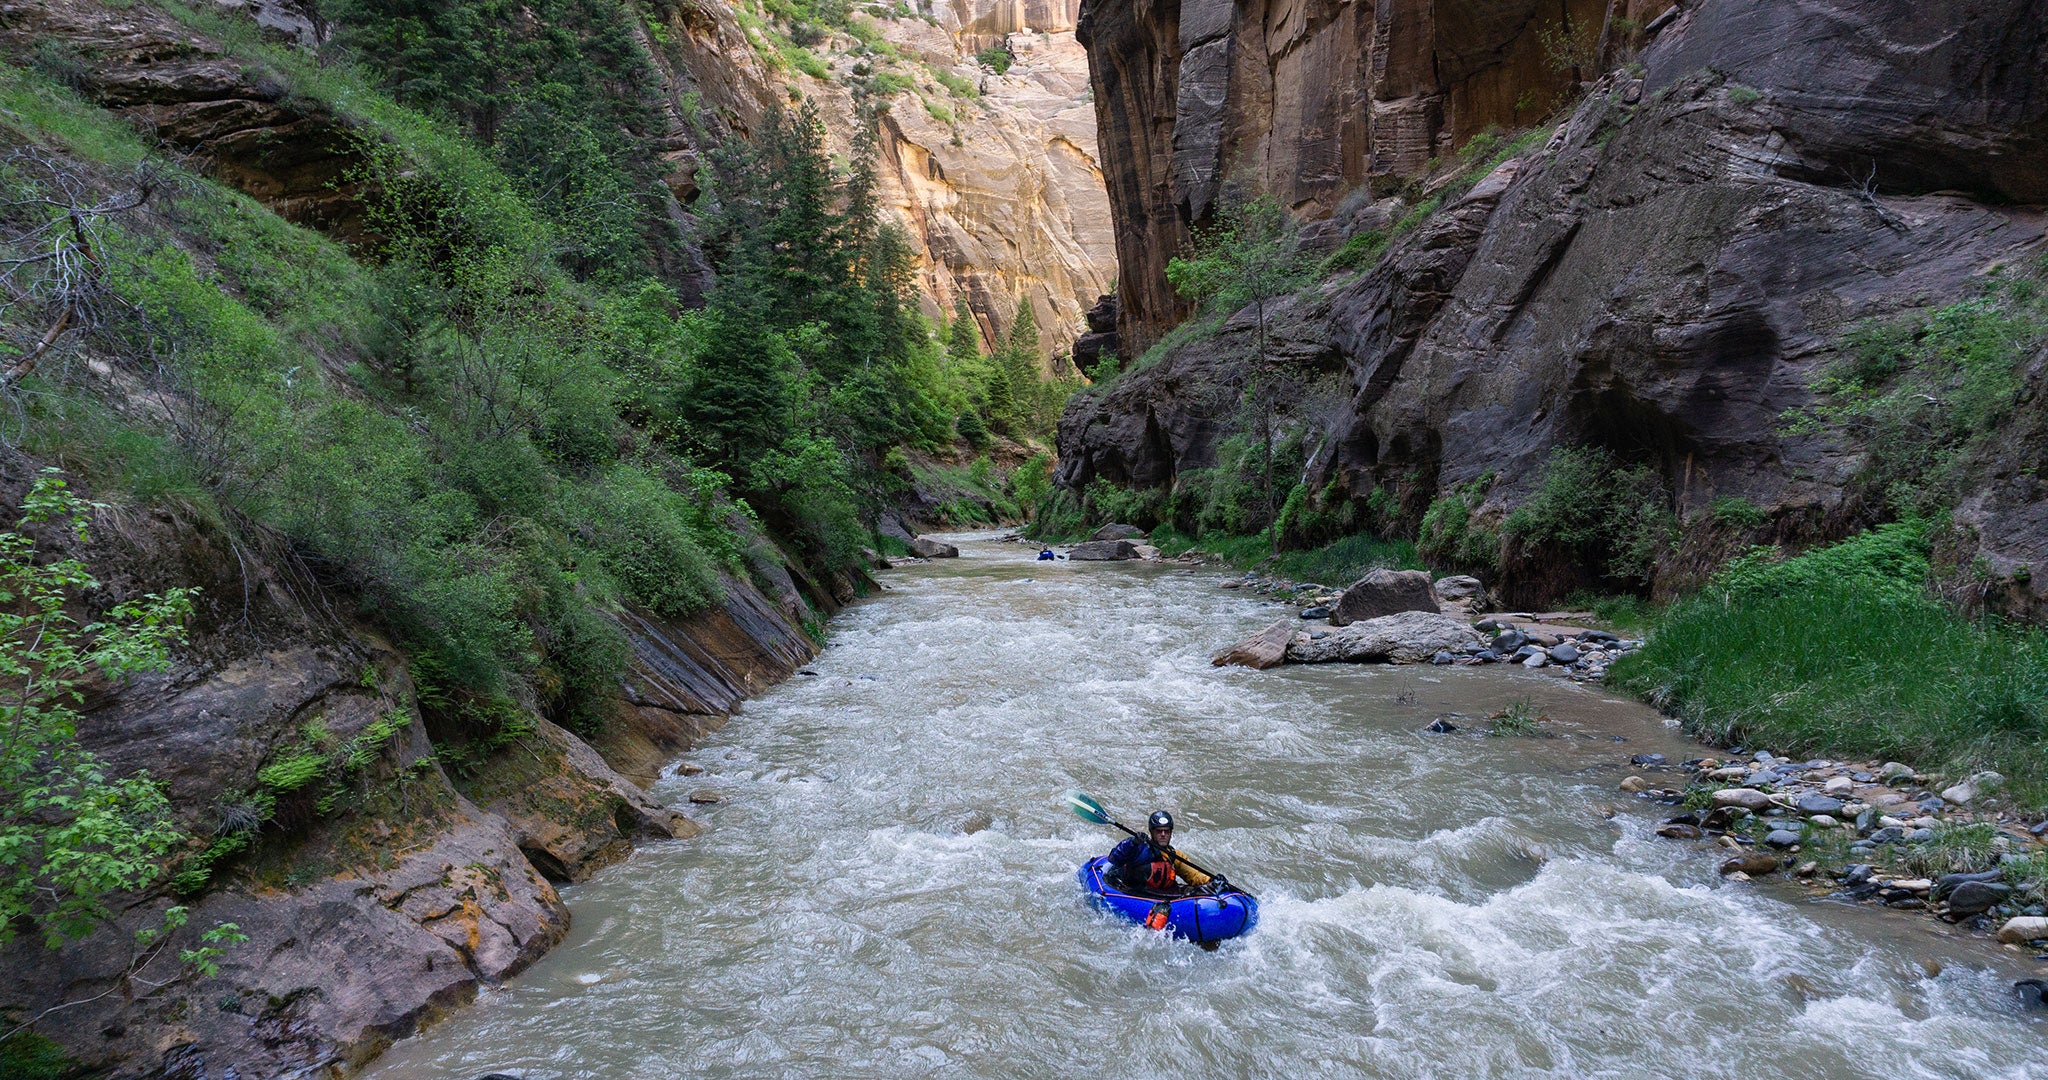 Rich Rudow navigating The Narrows in Zion.